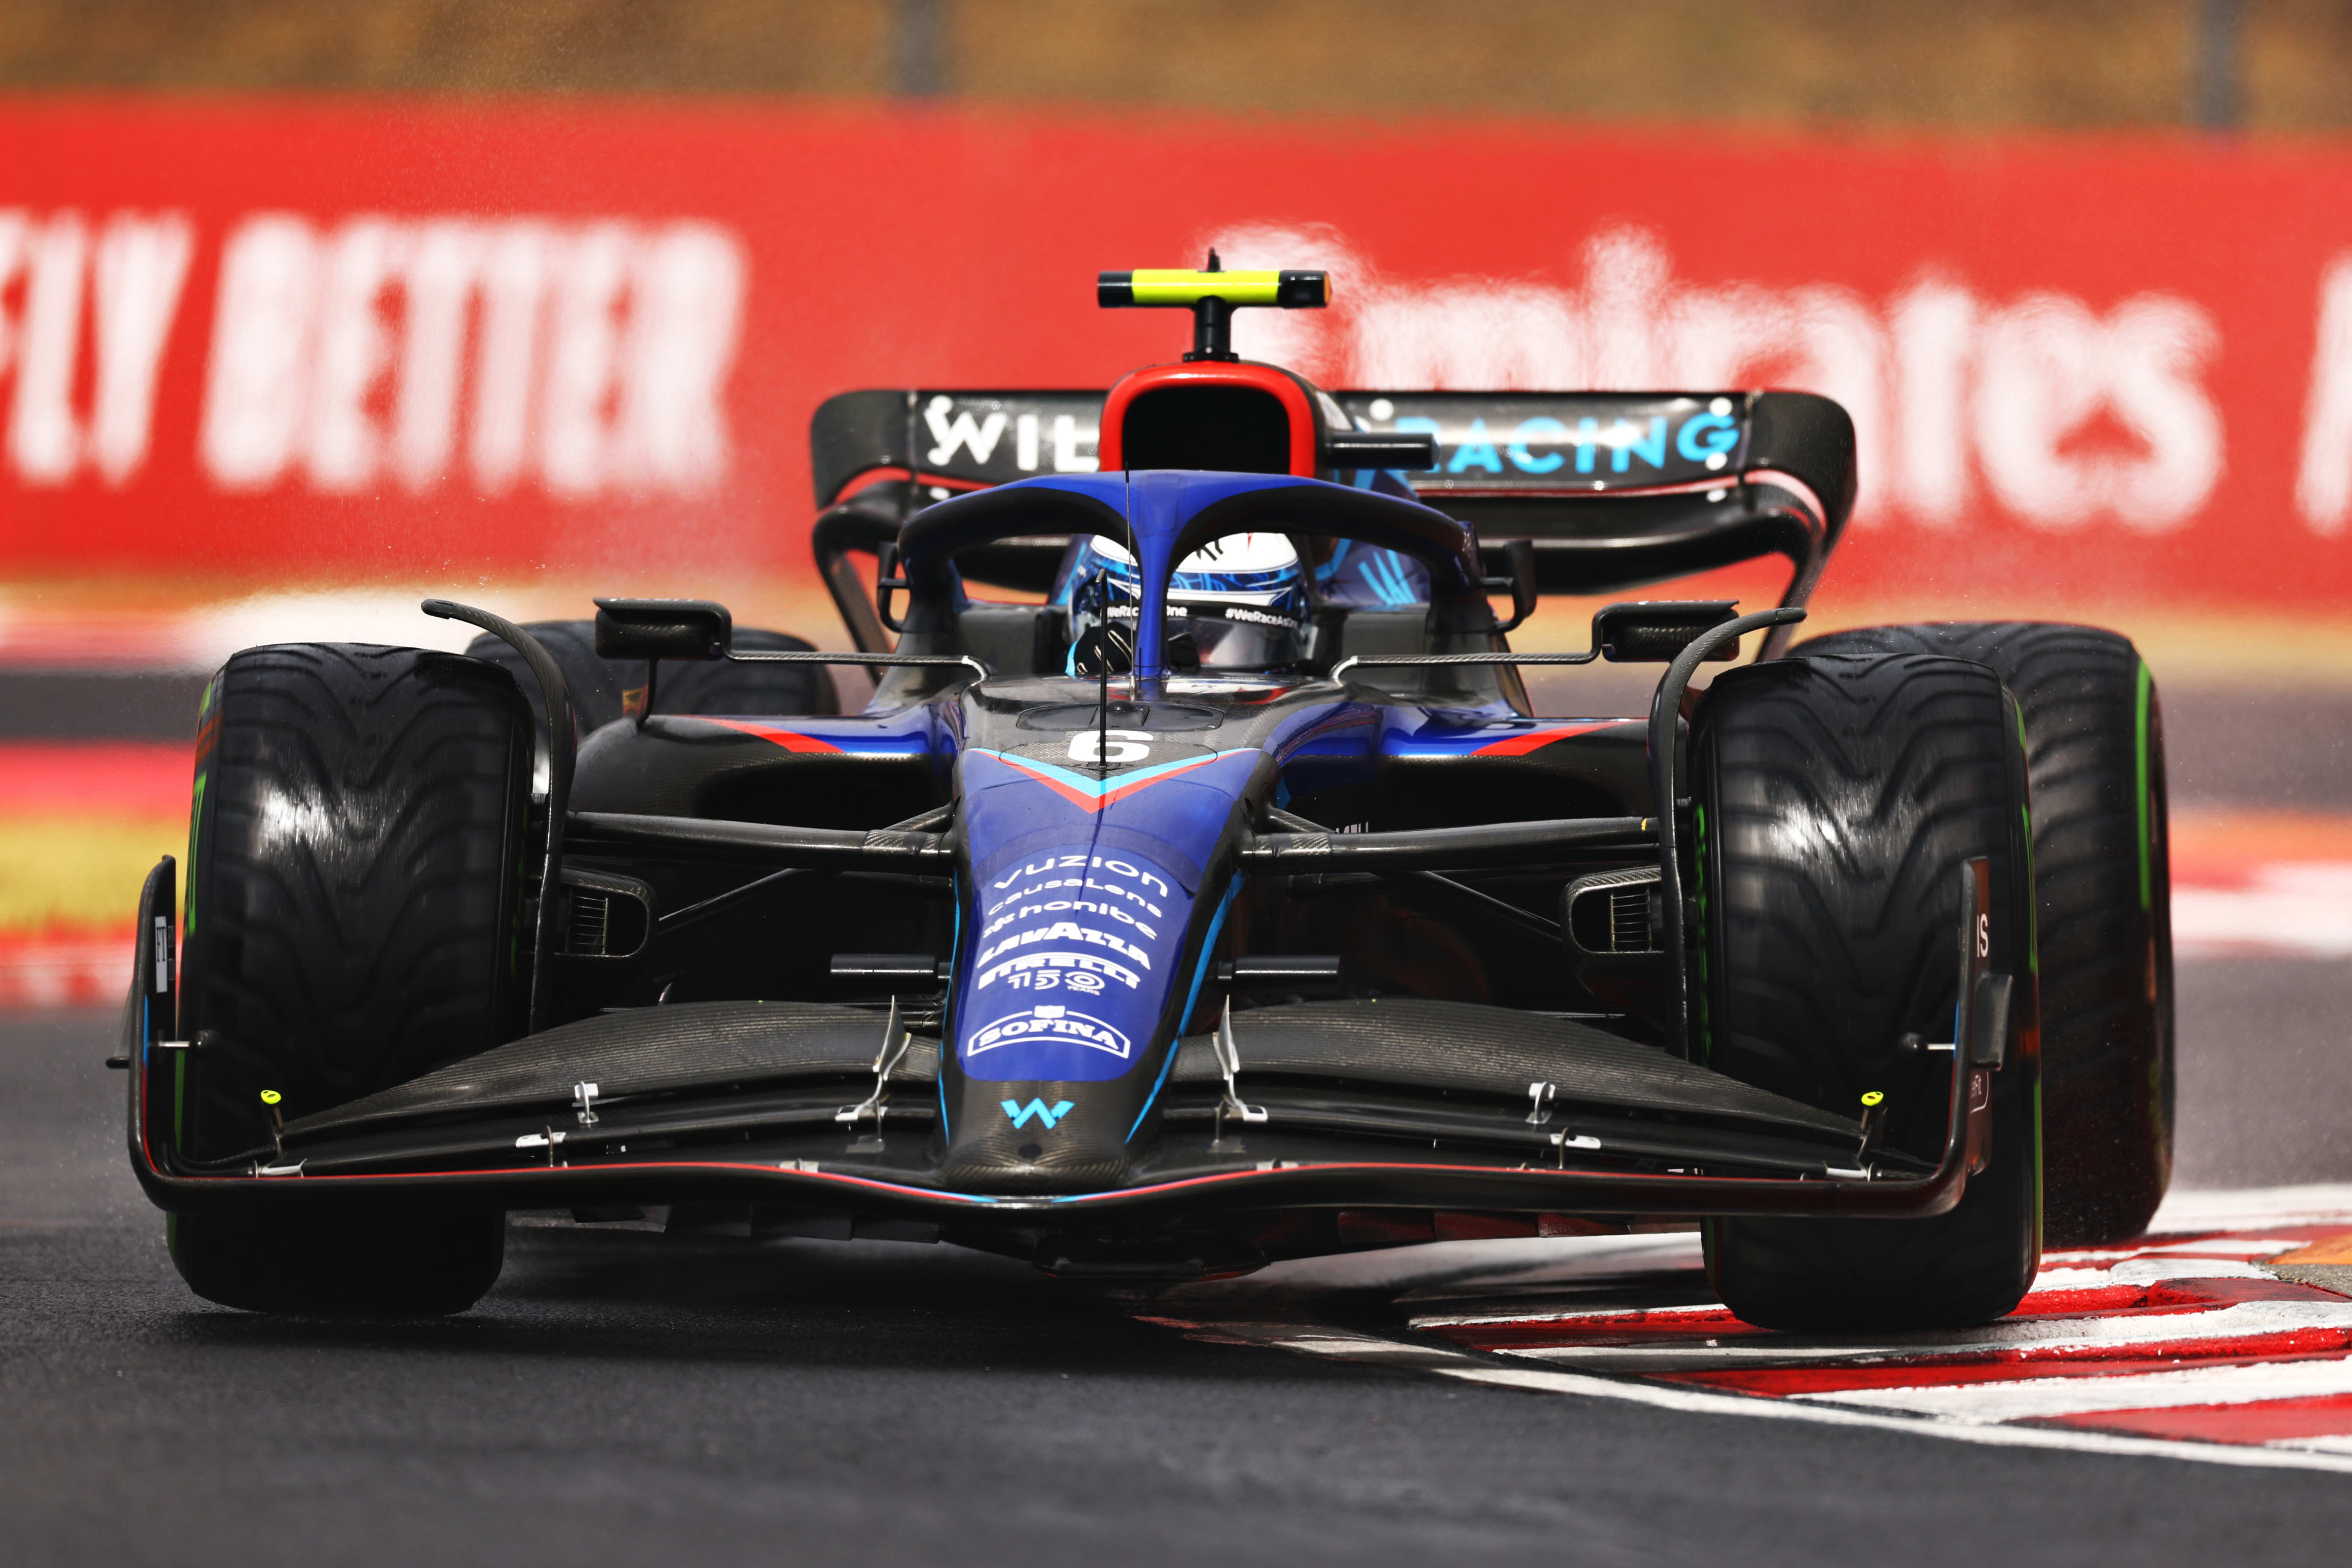 2022 Hungarian Grand Prix FP3 report and highlights Sensational Latifi leads Williams 1-3 in wet final practice in Budapest as Leclerc takes P2 Formula 1®